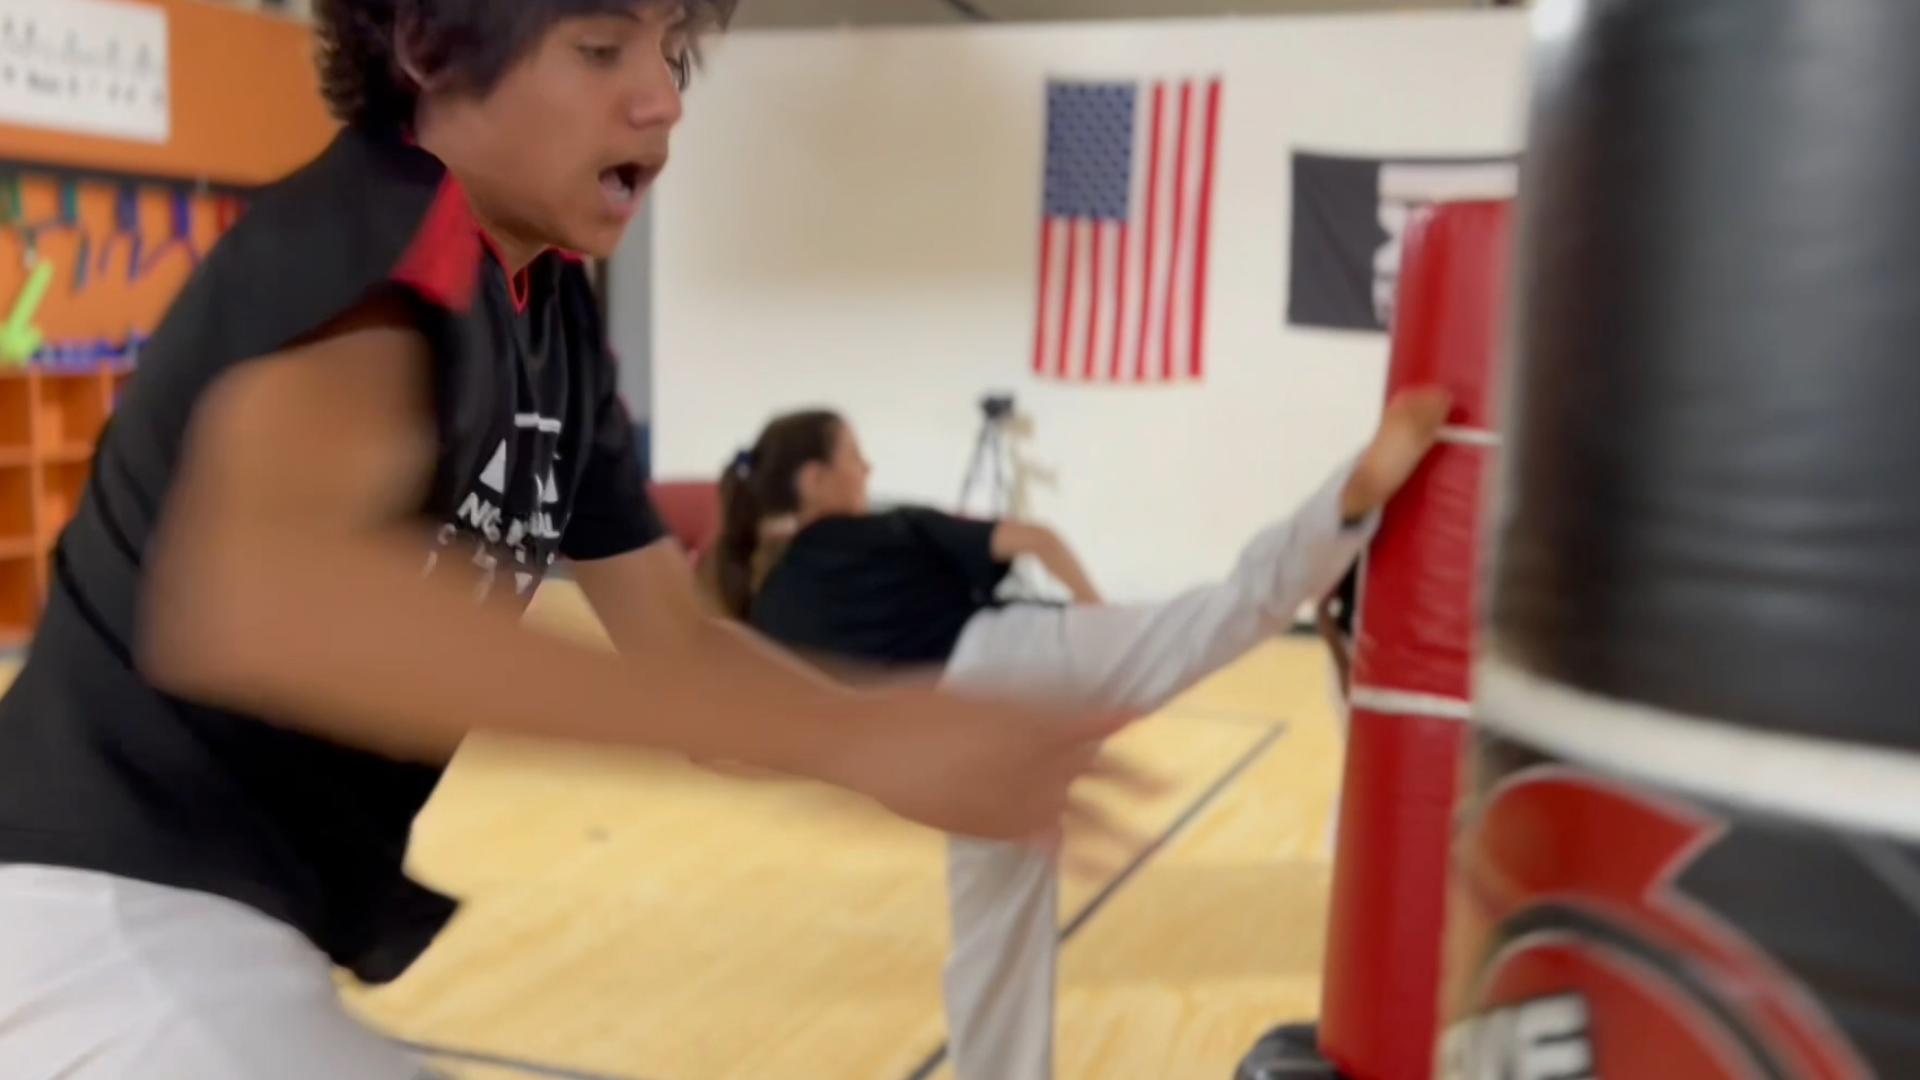 No Limits Marital Arts in Jersey Village is sending five students of various ages to the USATKD National Championships in Fort Worth.